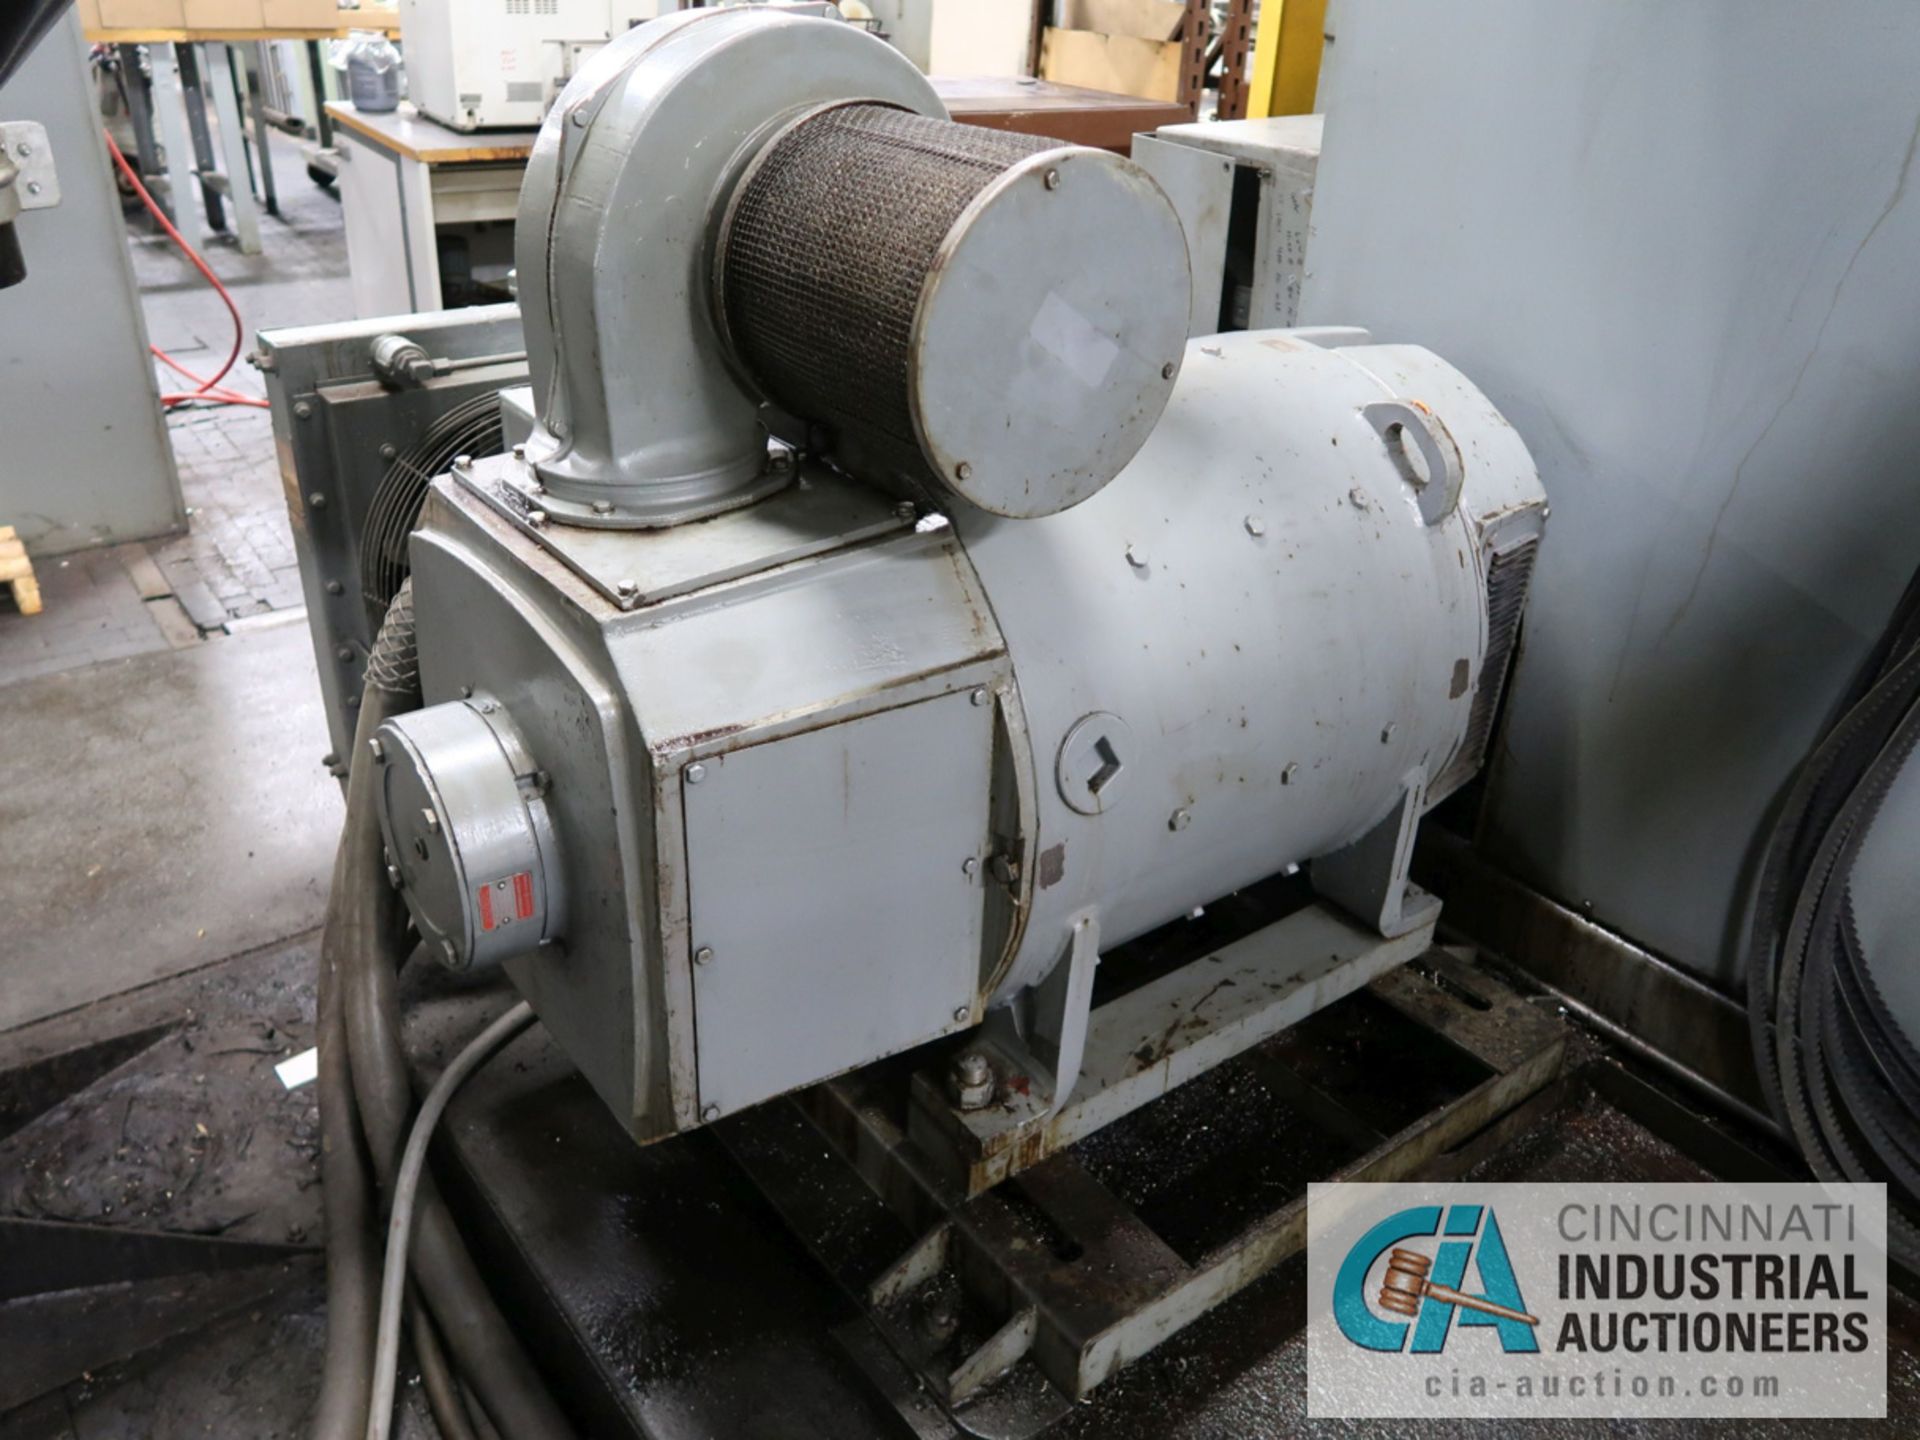 48” X 108” LEBLOND 15” HOLLOW SPINDLE MODEL 5029 N/C FLAT BED LATHE; GE 1050 CONTROL, 32” CHUCK, - Image 17 of 22